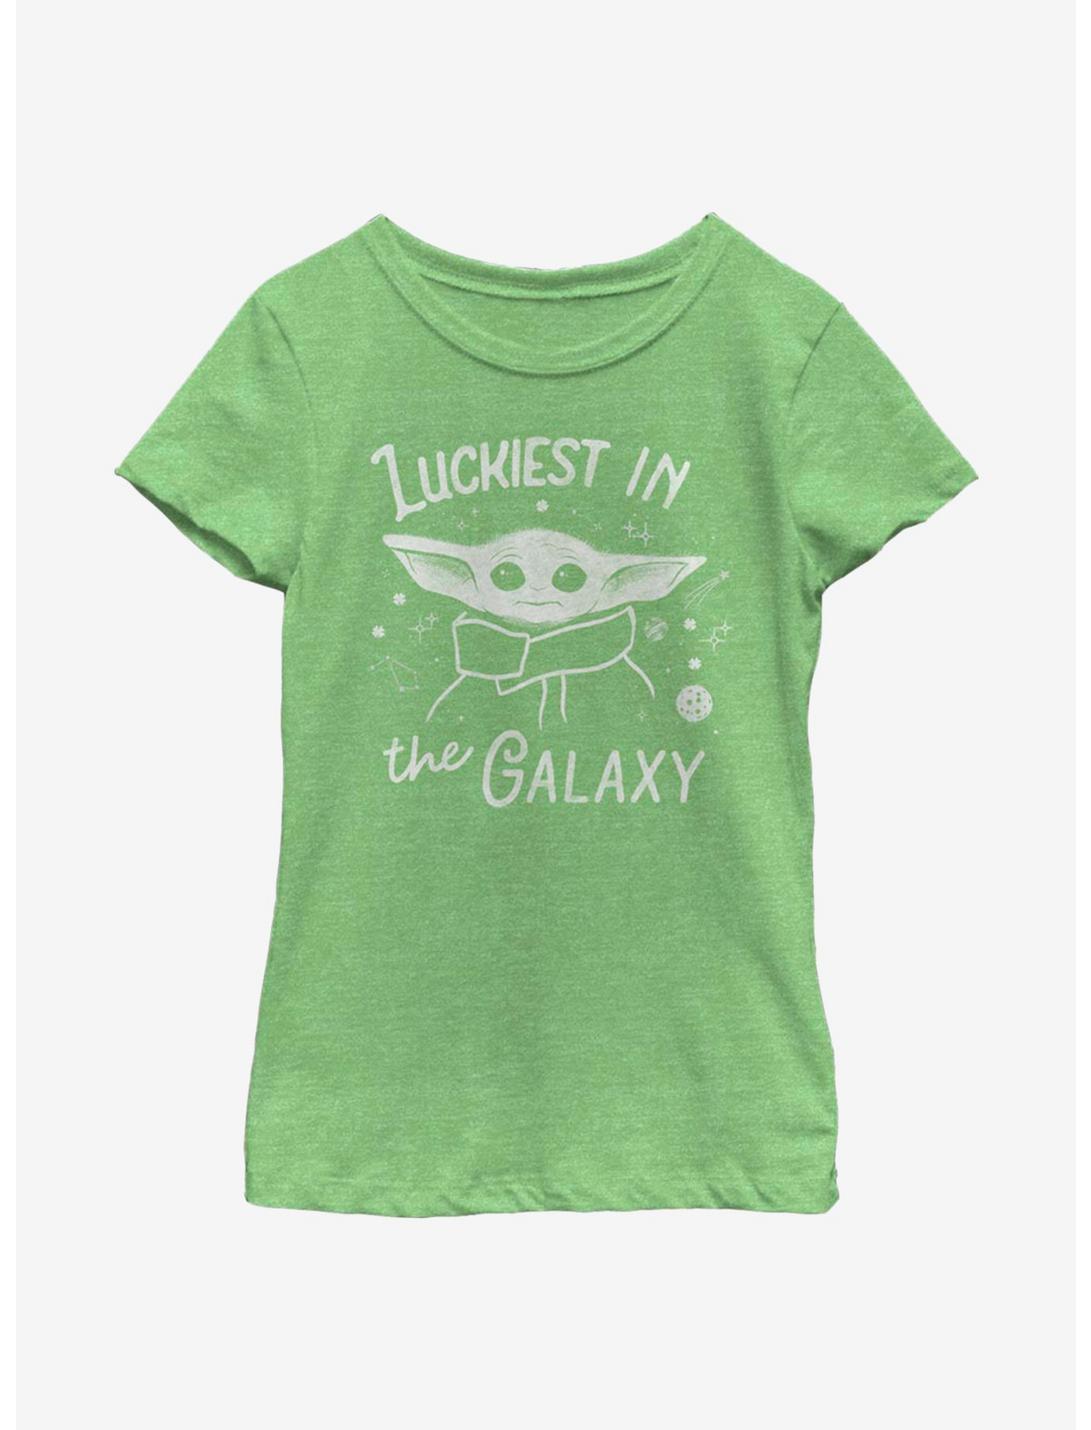 Star Wars The Mandalorian The Child Luckiest In The Galaxy Youth Girls T-Shirt, GRN APPLE, hi-res